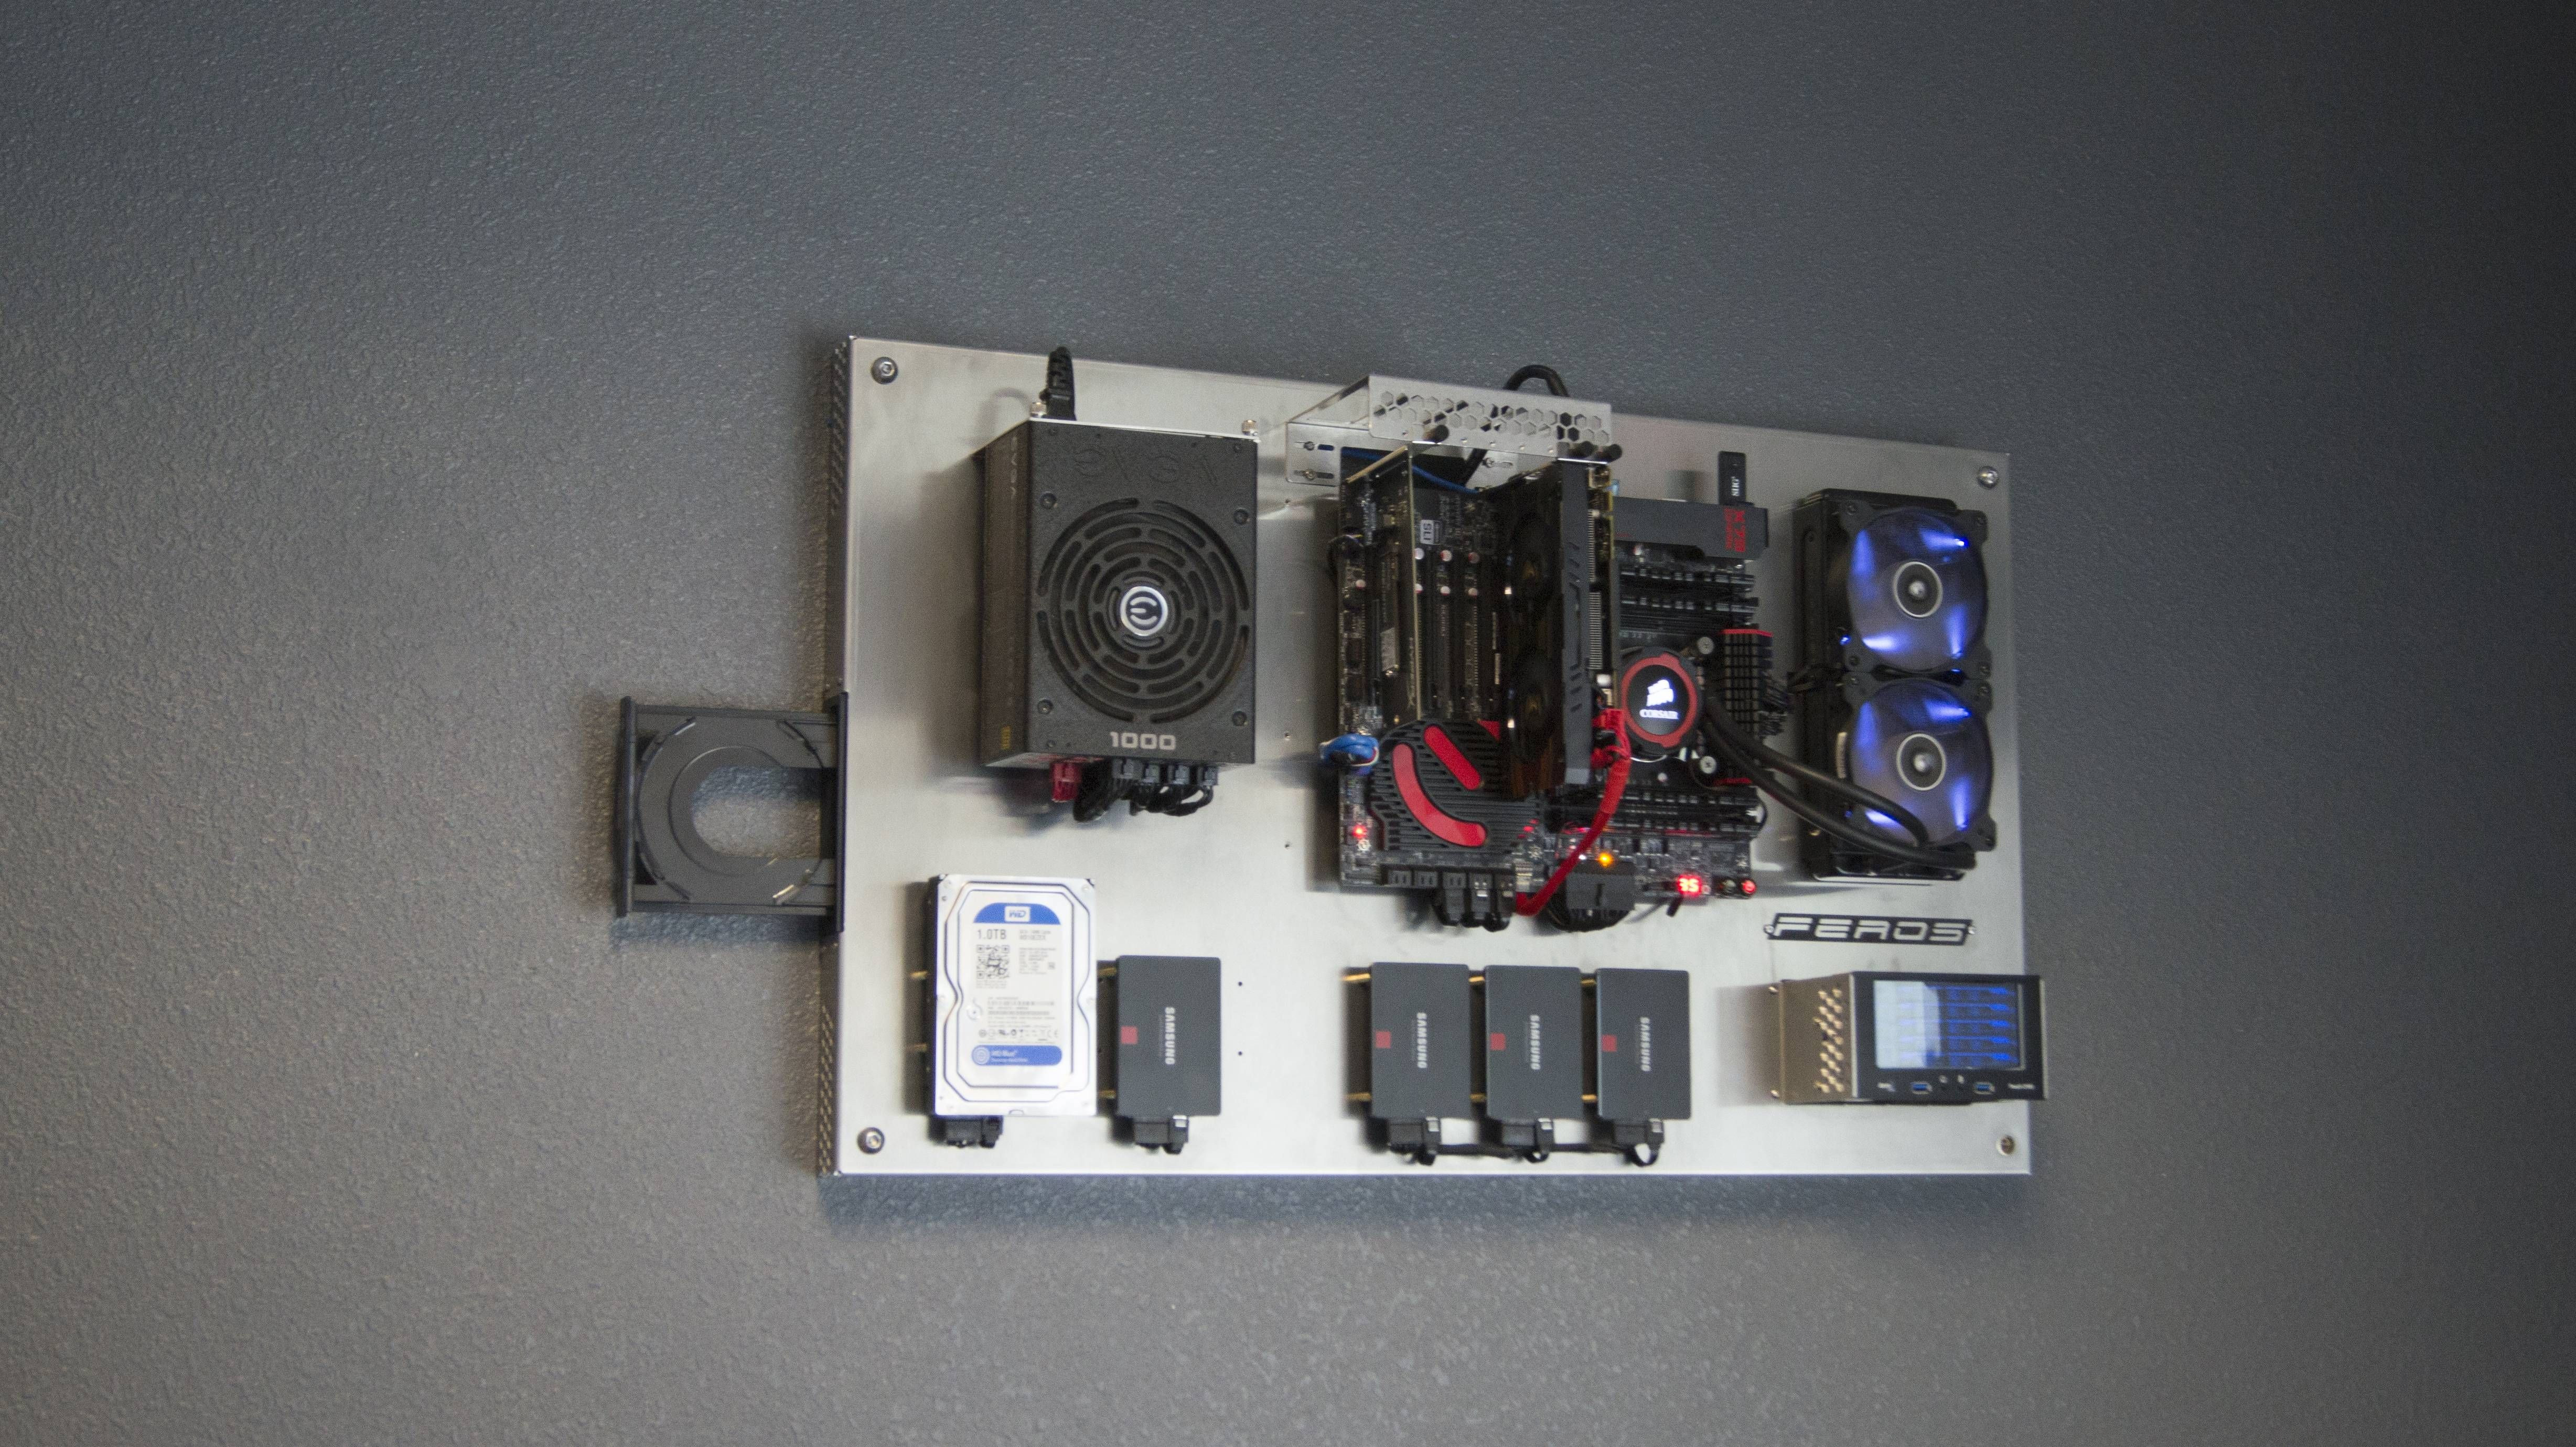 Best ideas about DIY Wall Mounted Pc
. Save or Pin Evolution Feros wall mounted PC case Now.